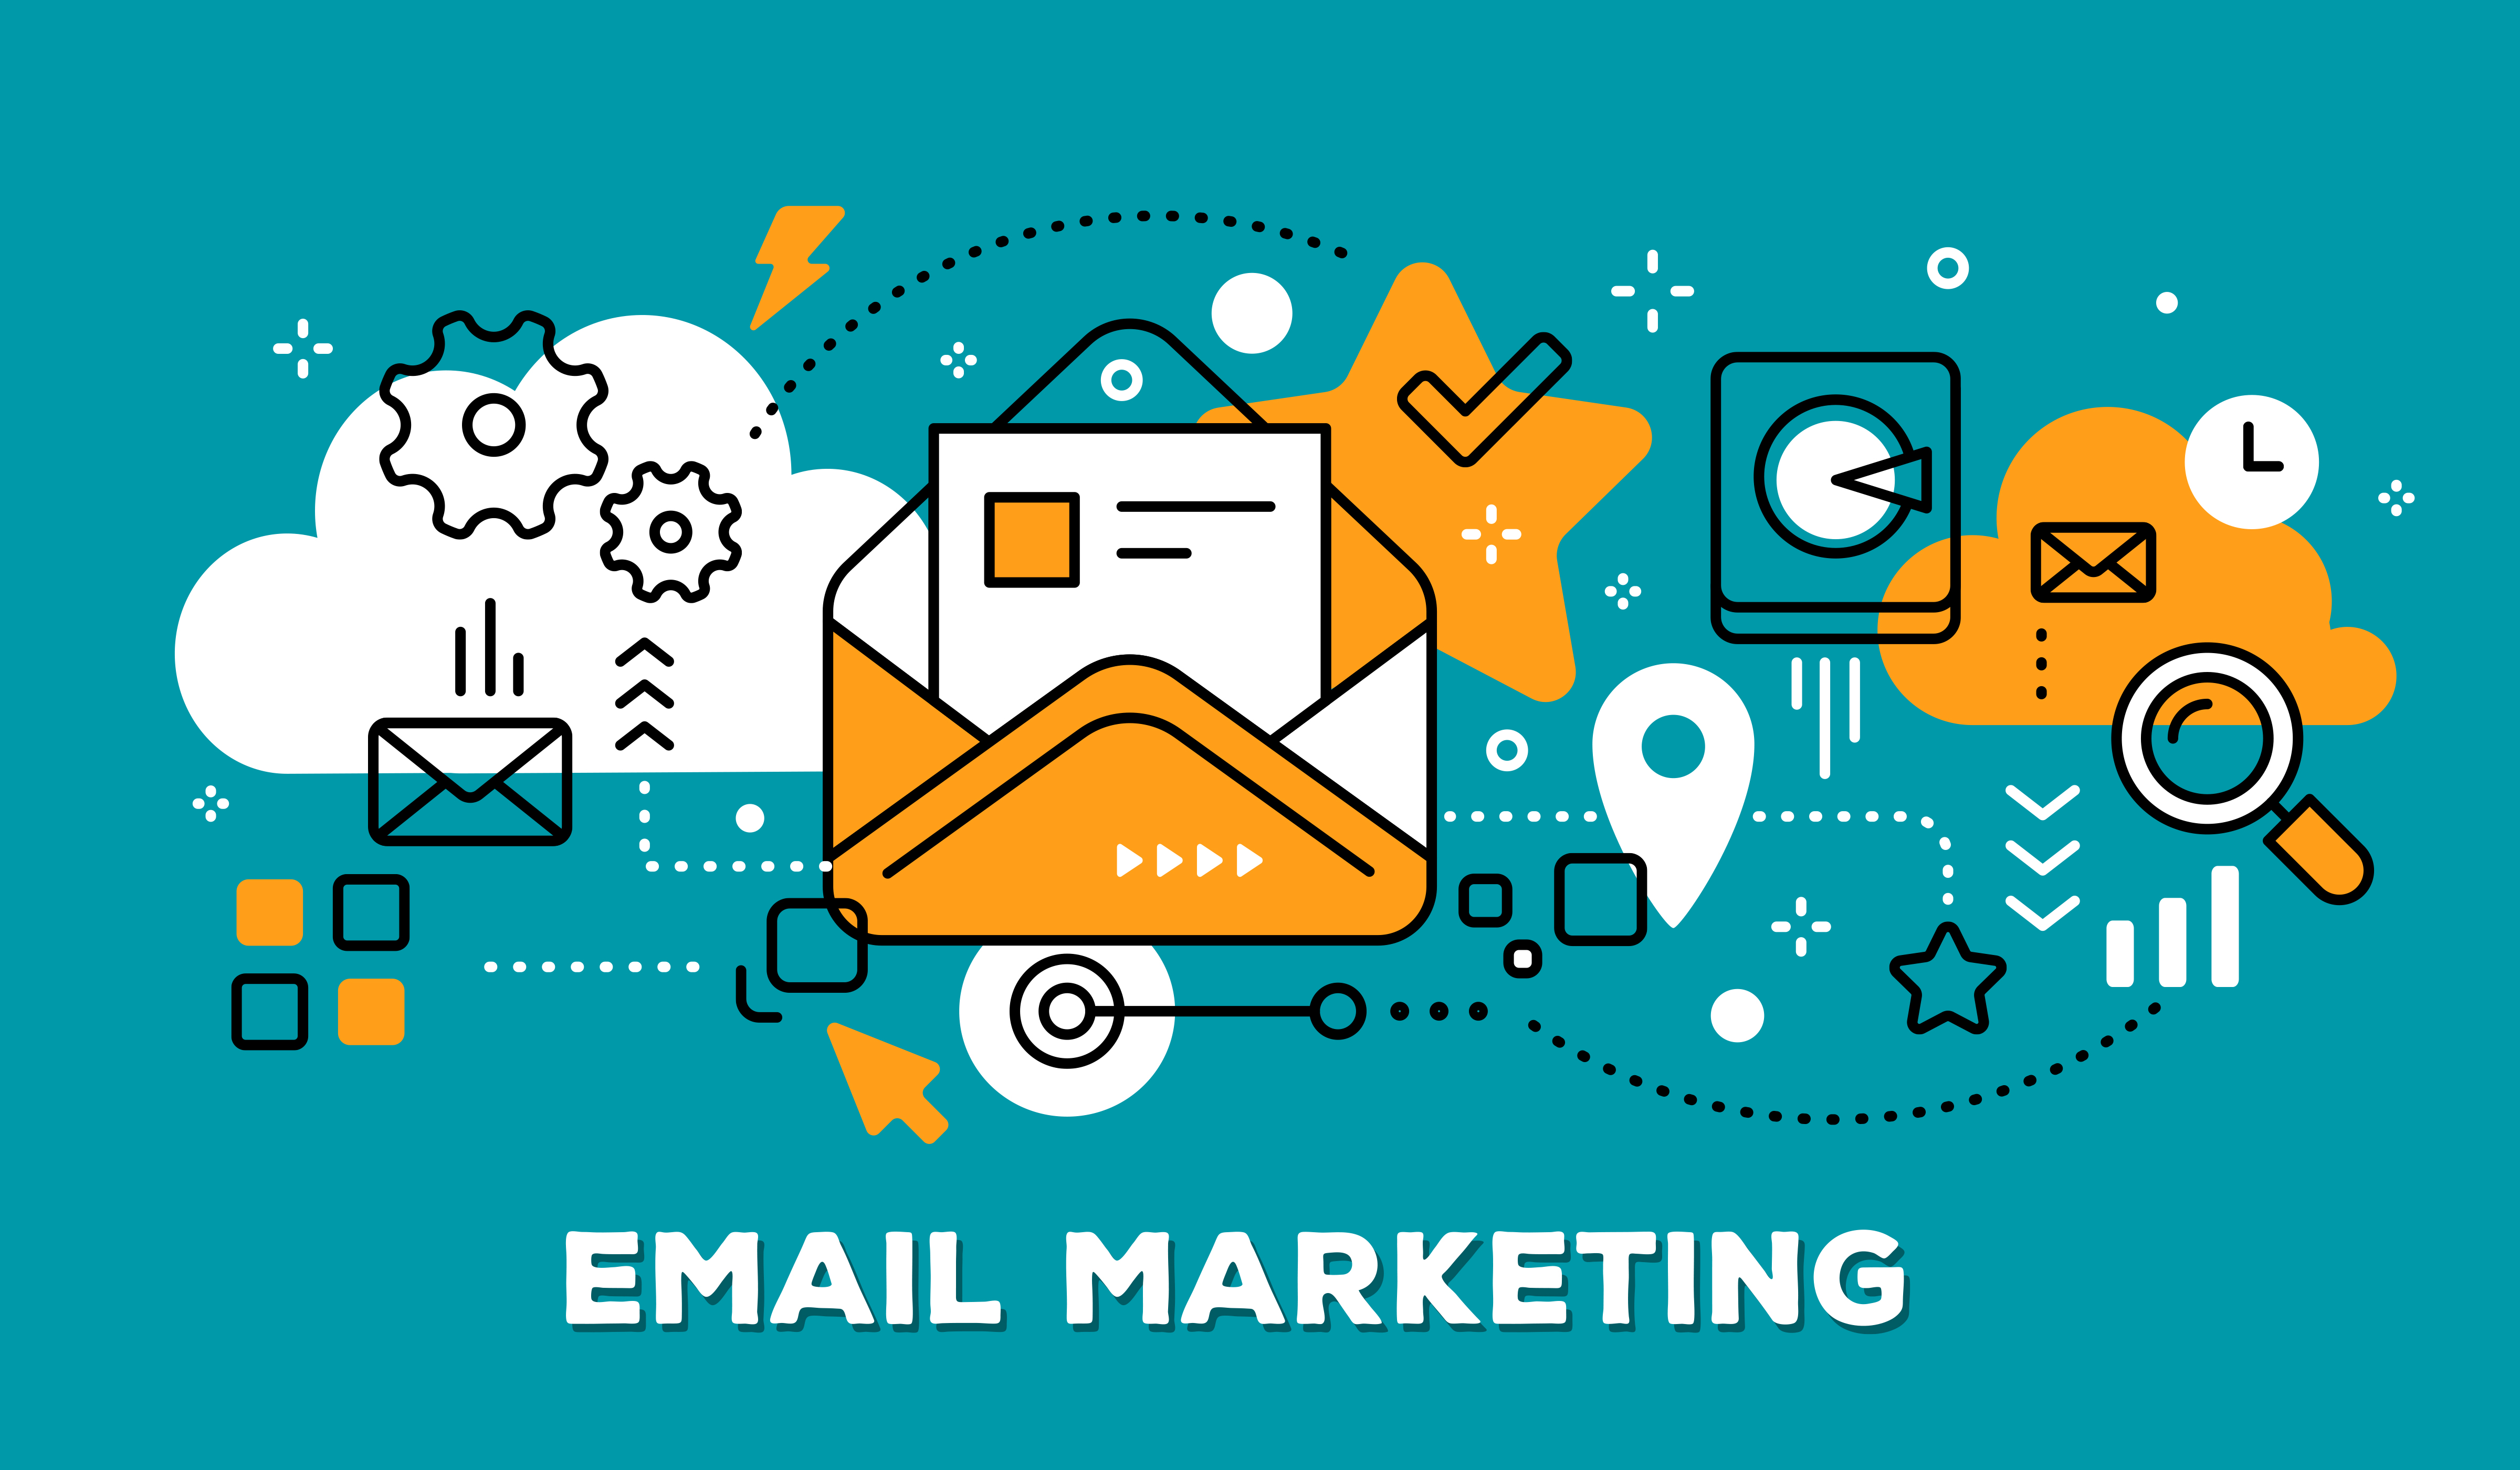 consells d'email marketing